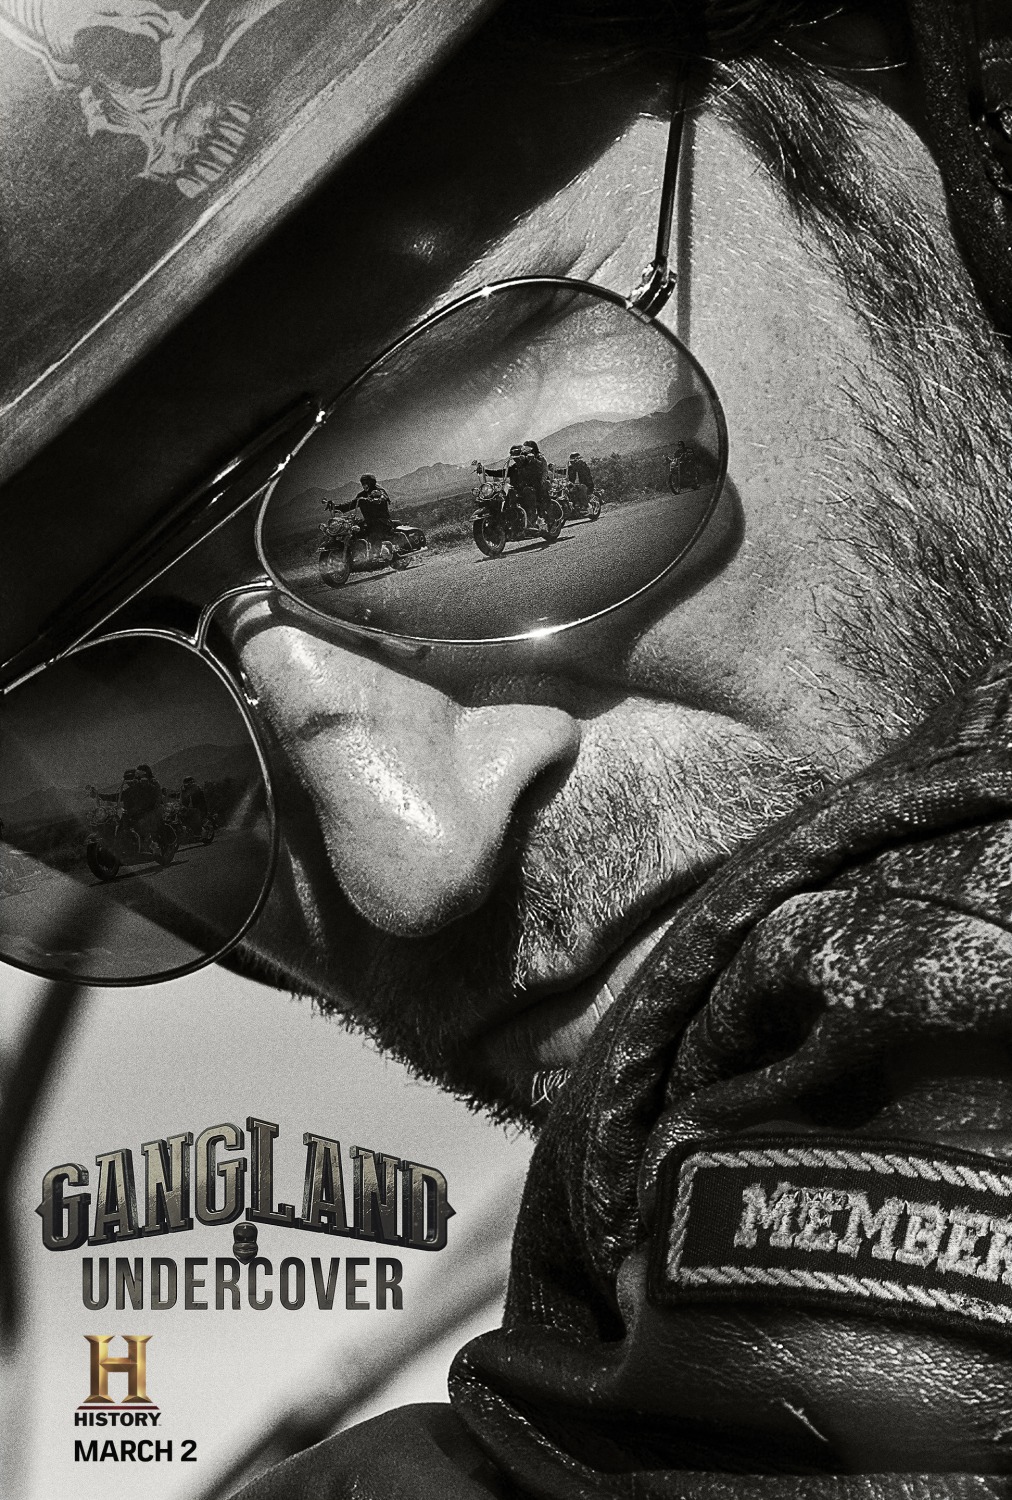 Extra Large TV Poster Image for Gangland Undercover (#2 of 2)